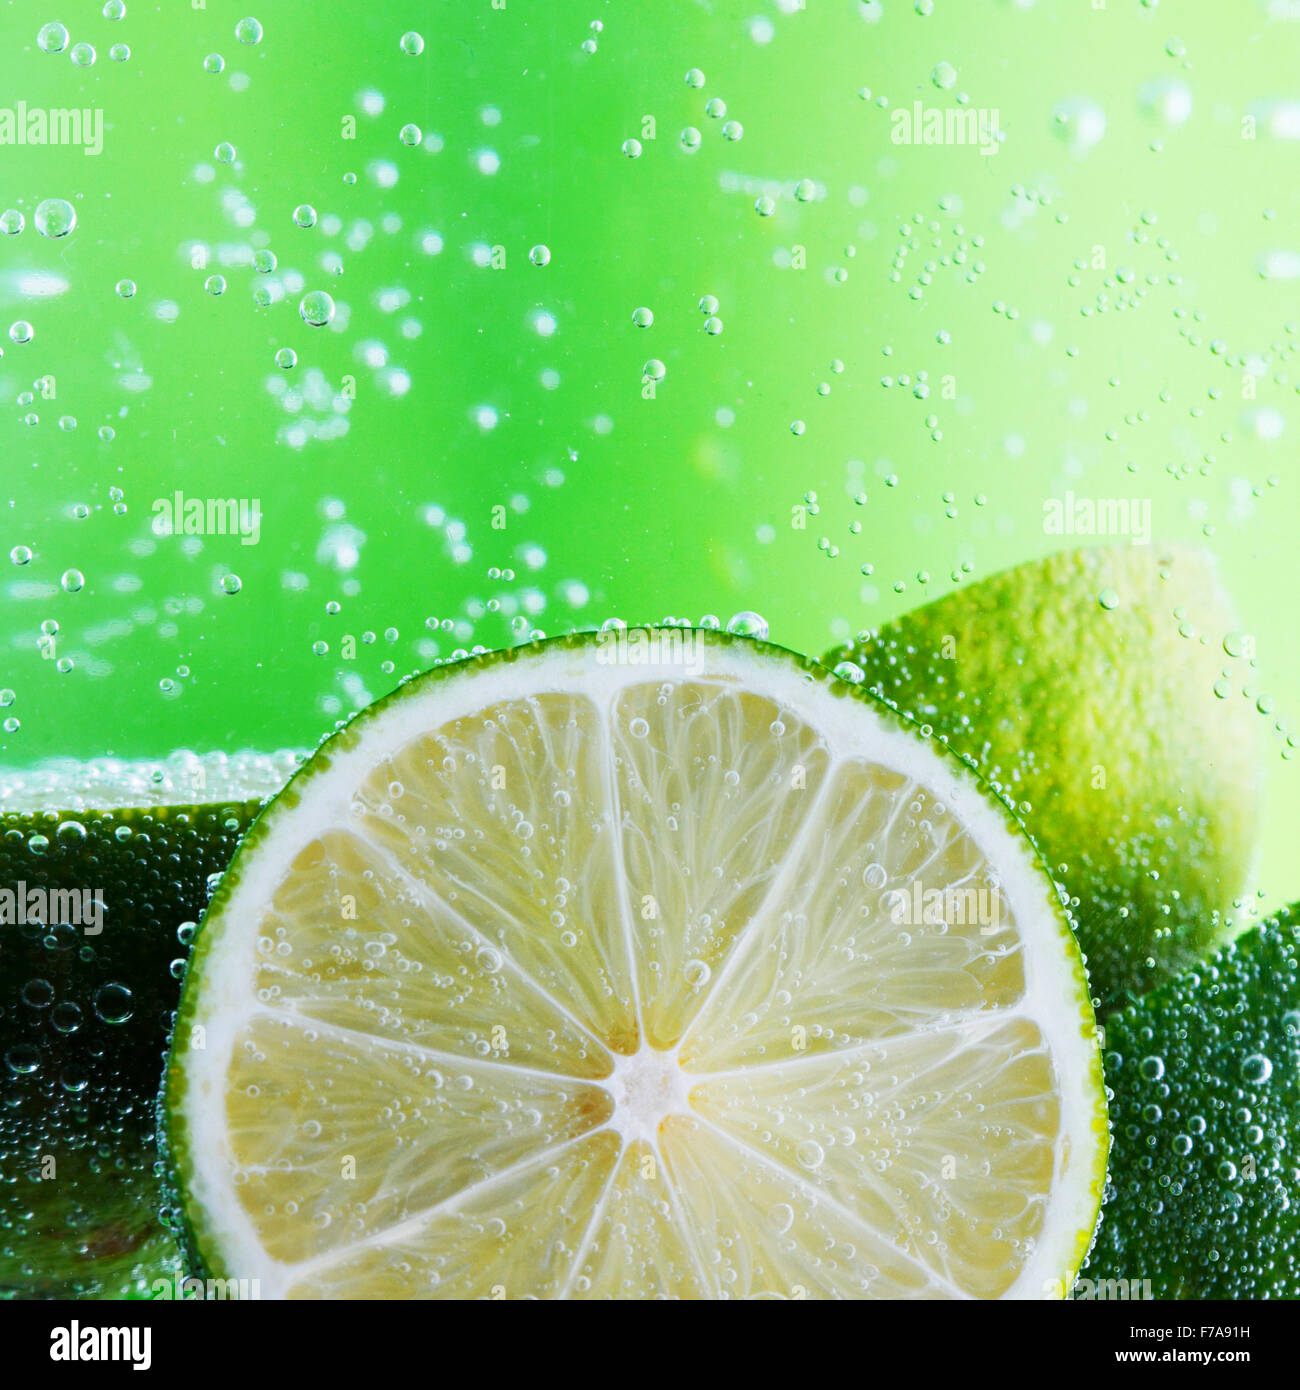 Cut limes in the water with bubbles on green background Stock Photo